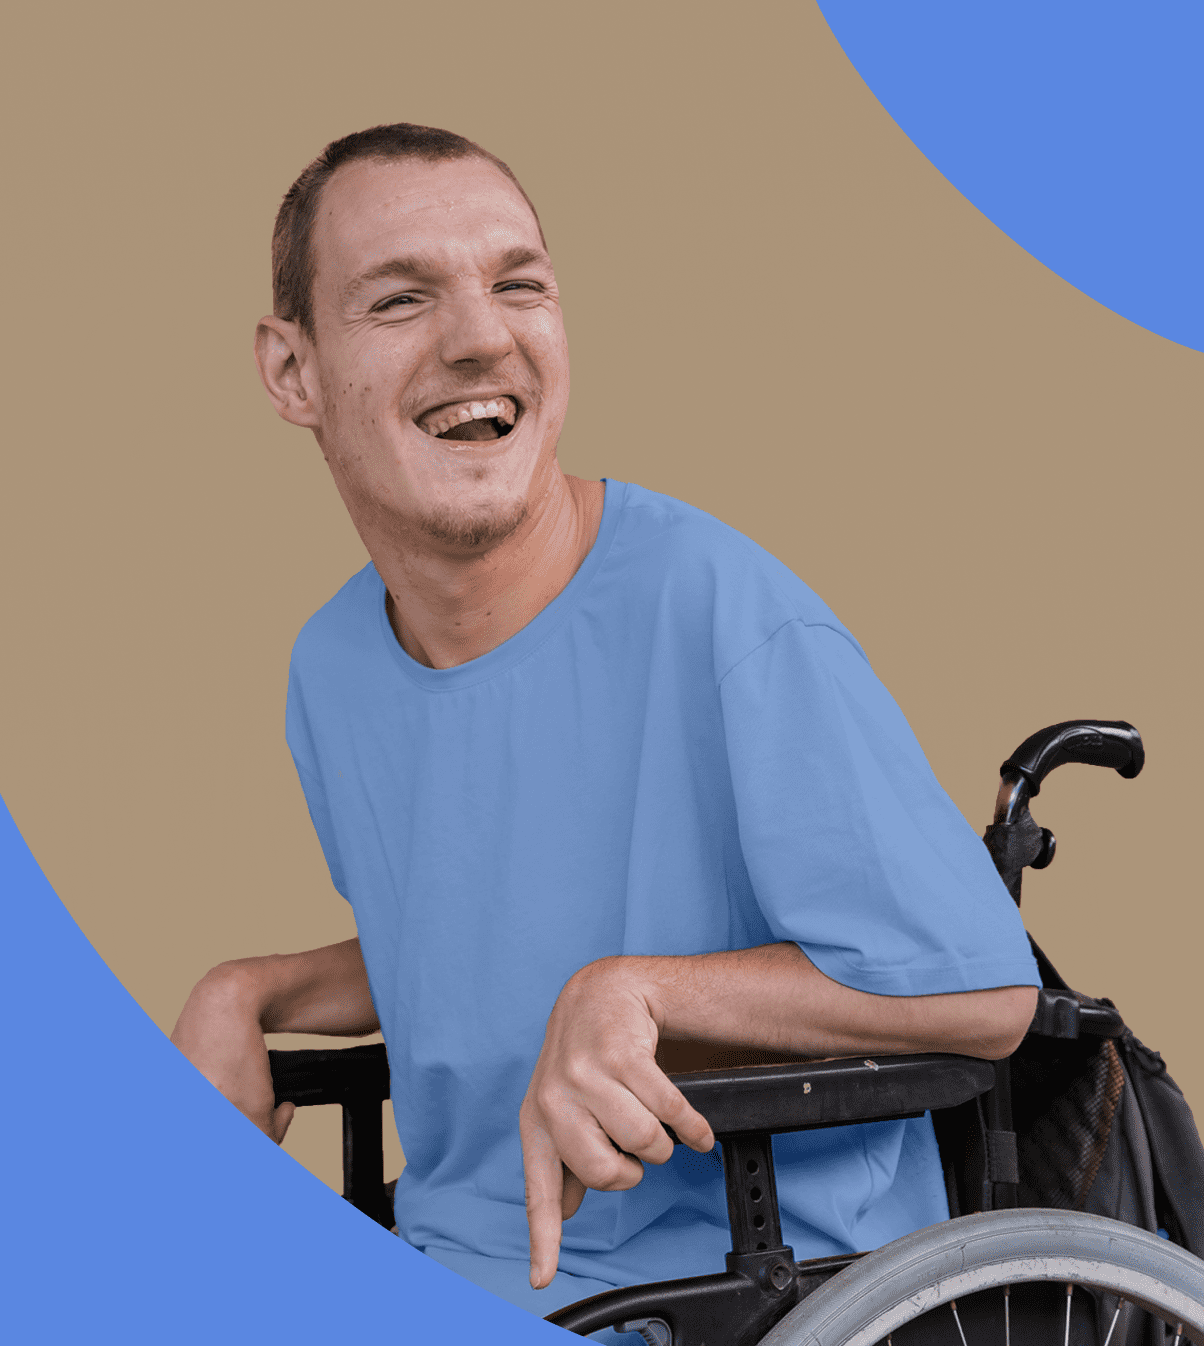 Man wearing a blue t-shirt sat in a wheelchair smiling